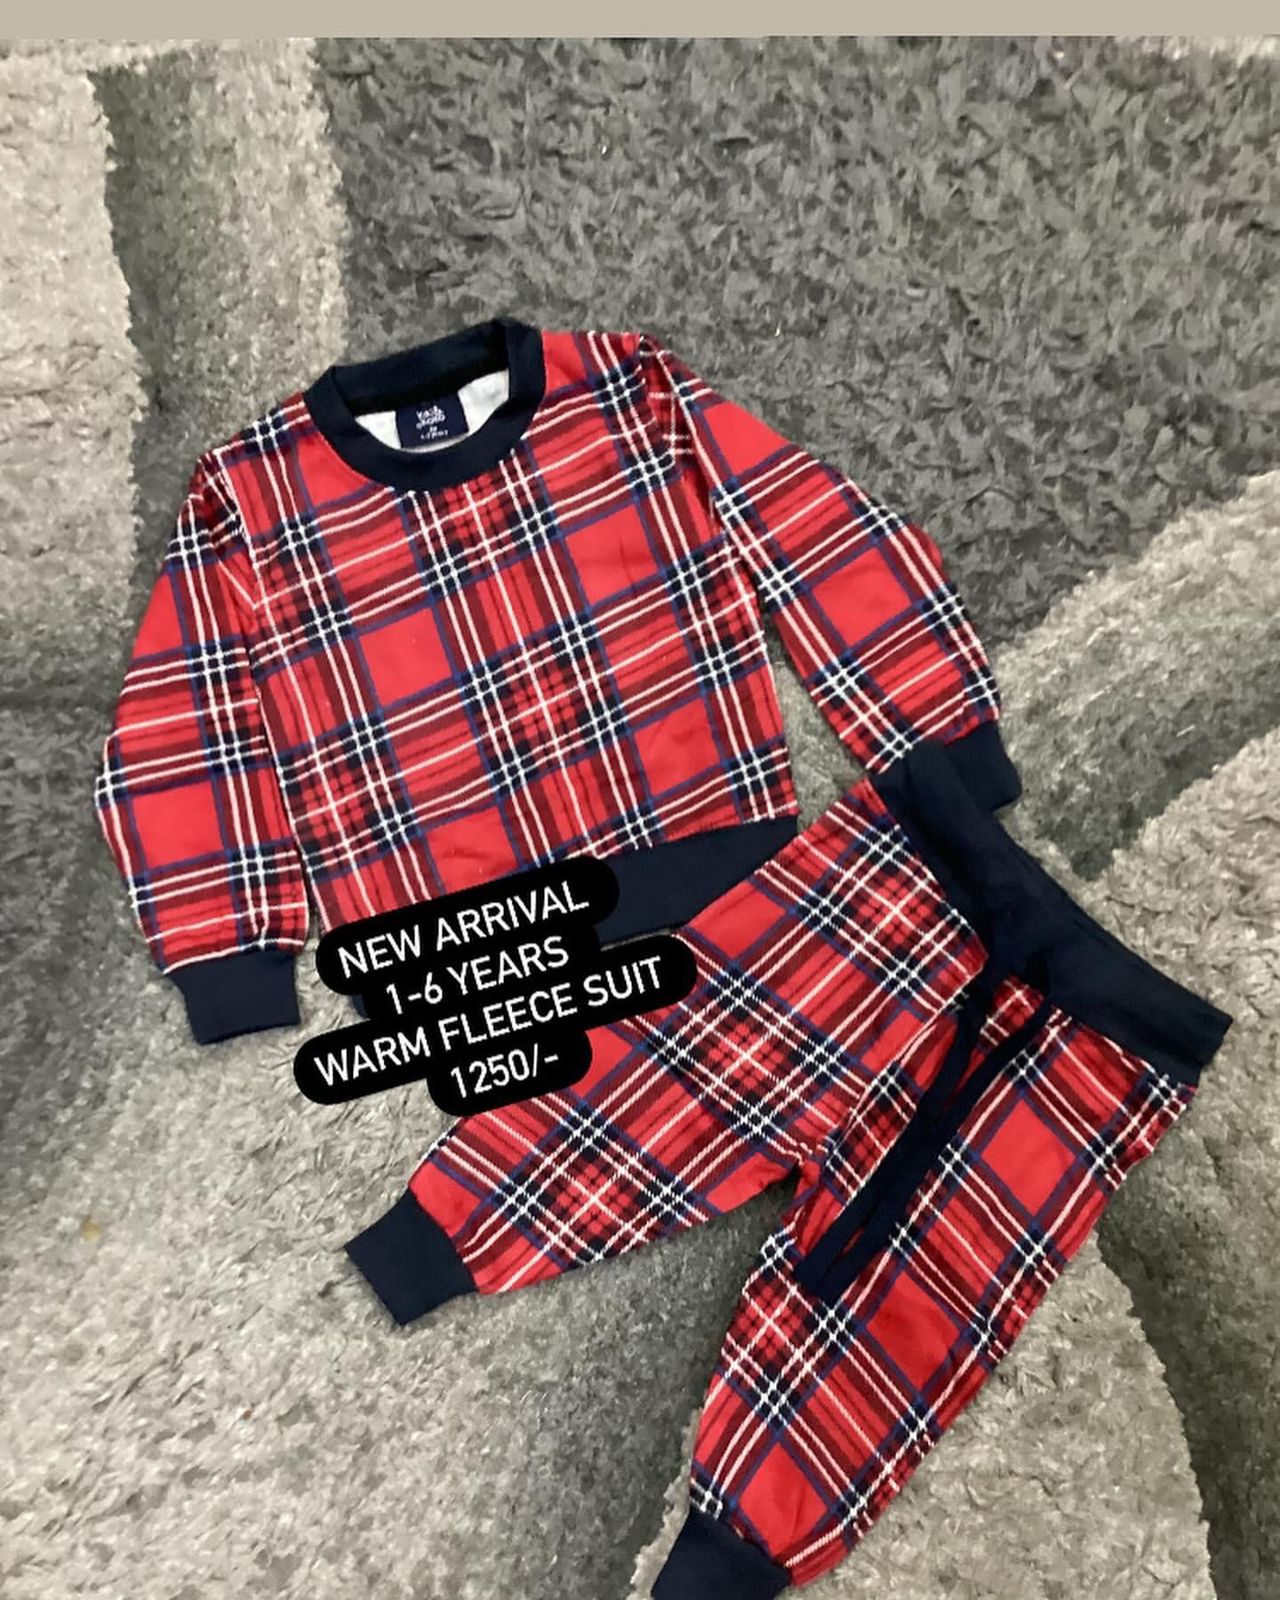 Kids Winter Gala New Arrivals Fleece Warm Shirt and Trouser Red and Black UK Style